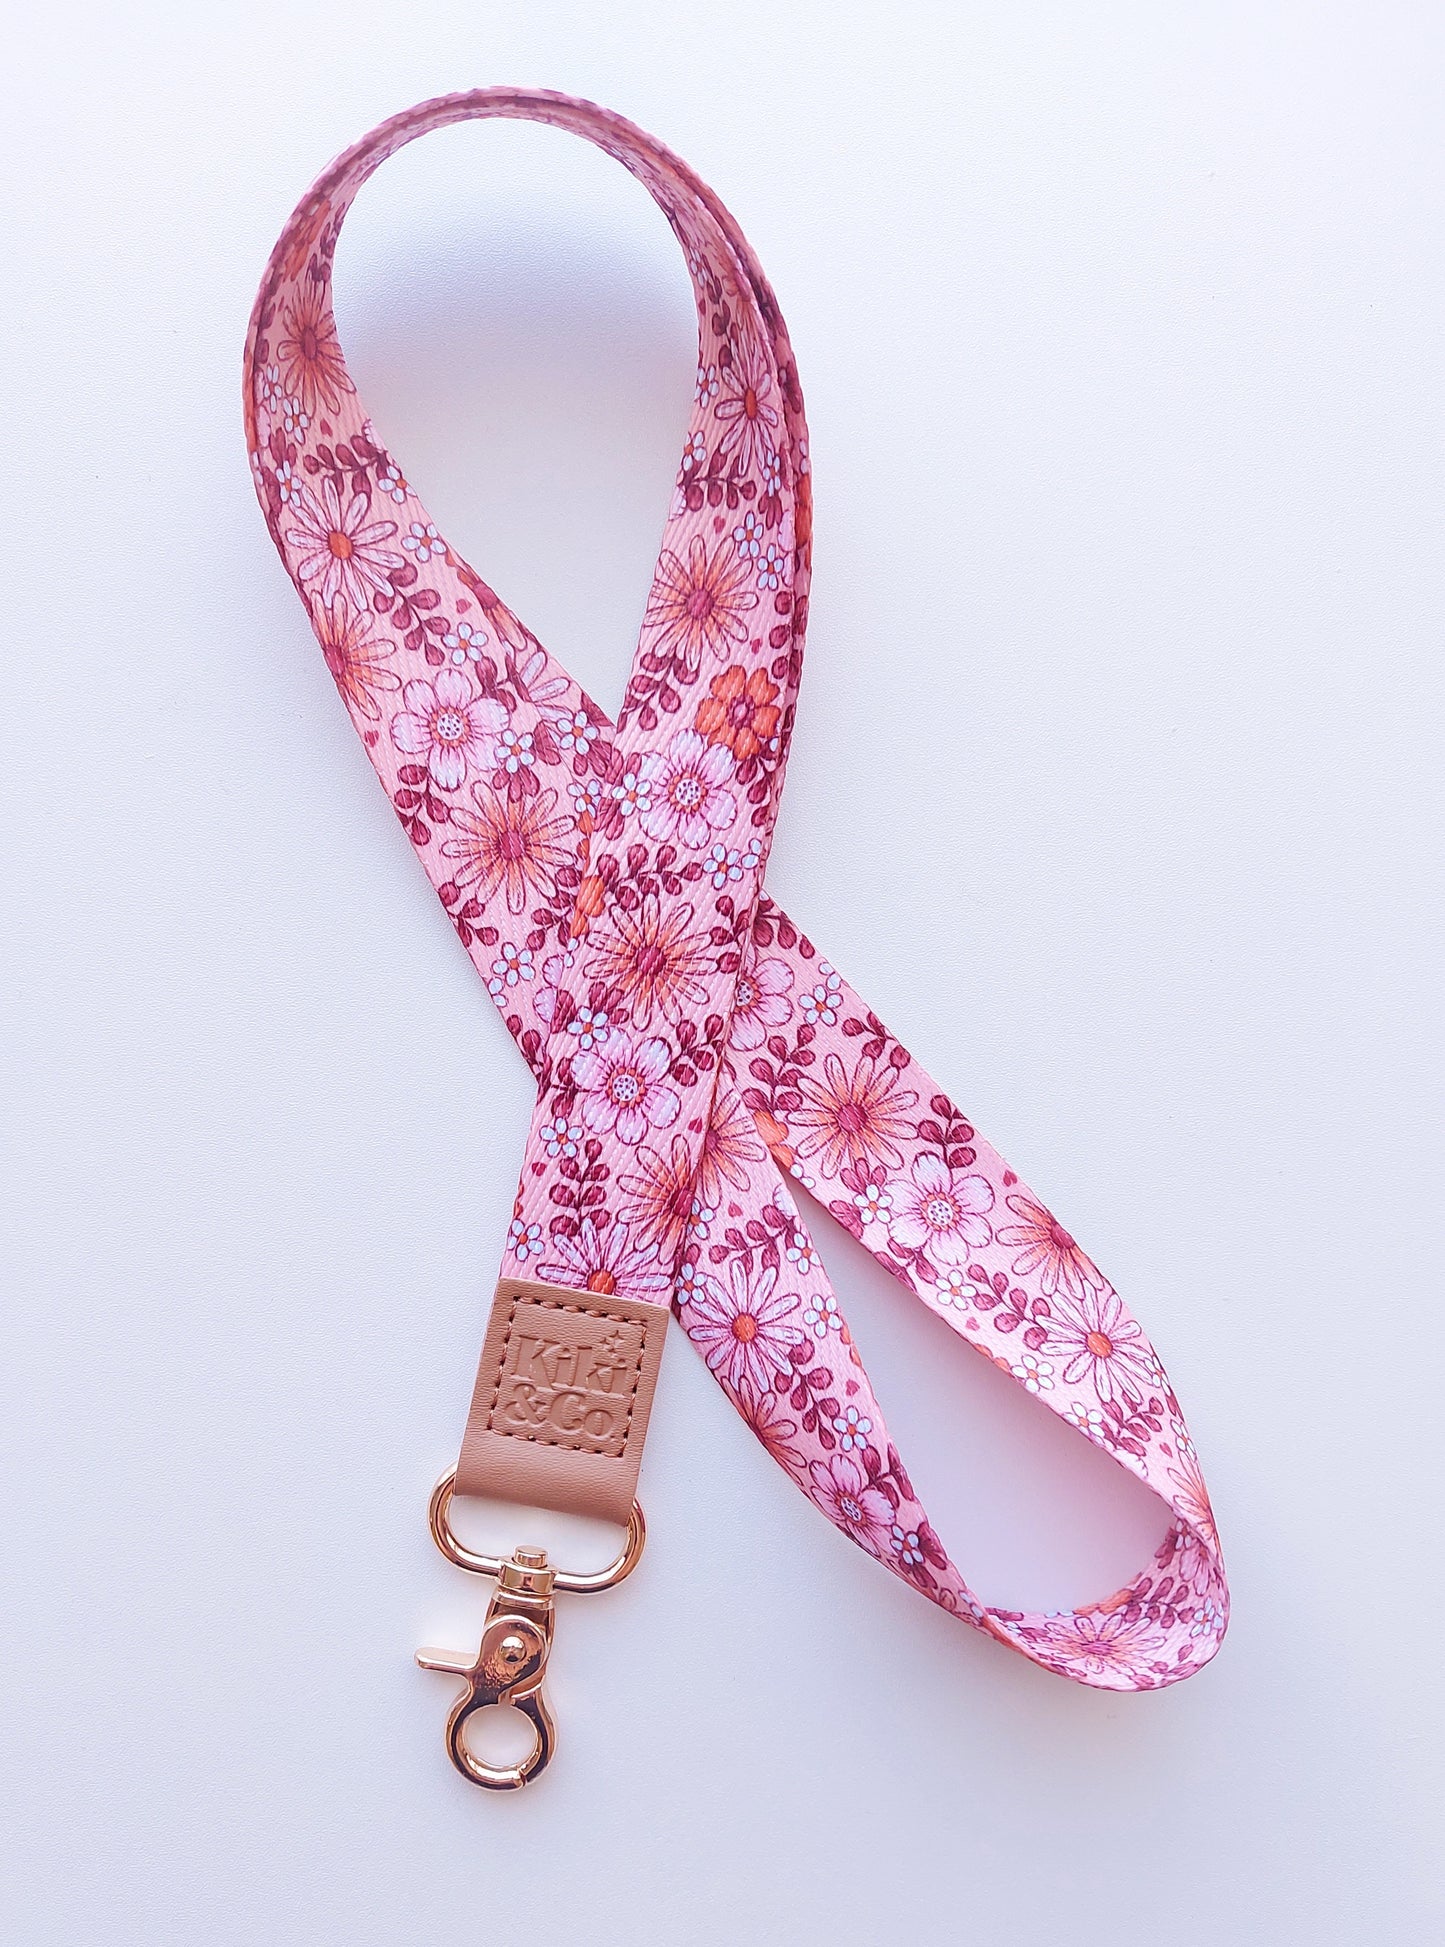 Pre-made Lanyard - Autumn Floral